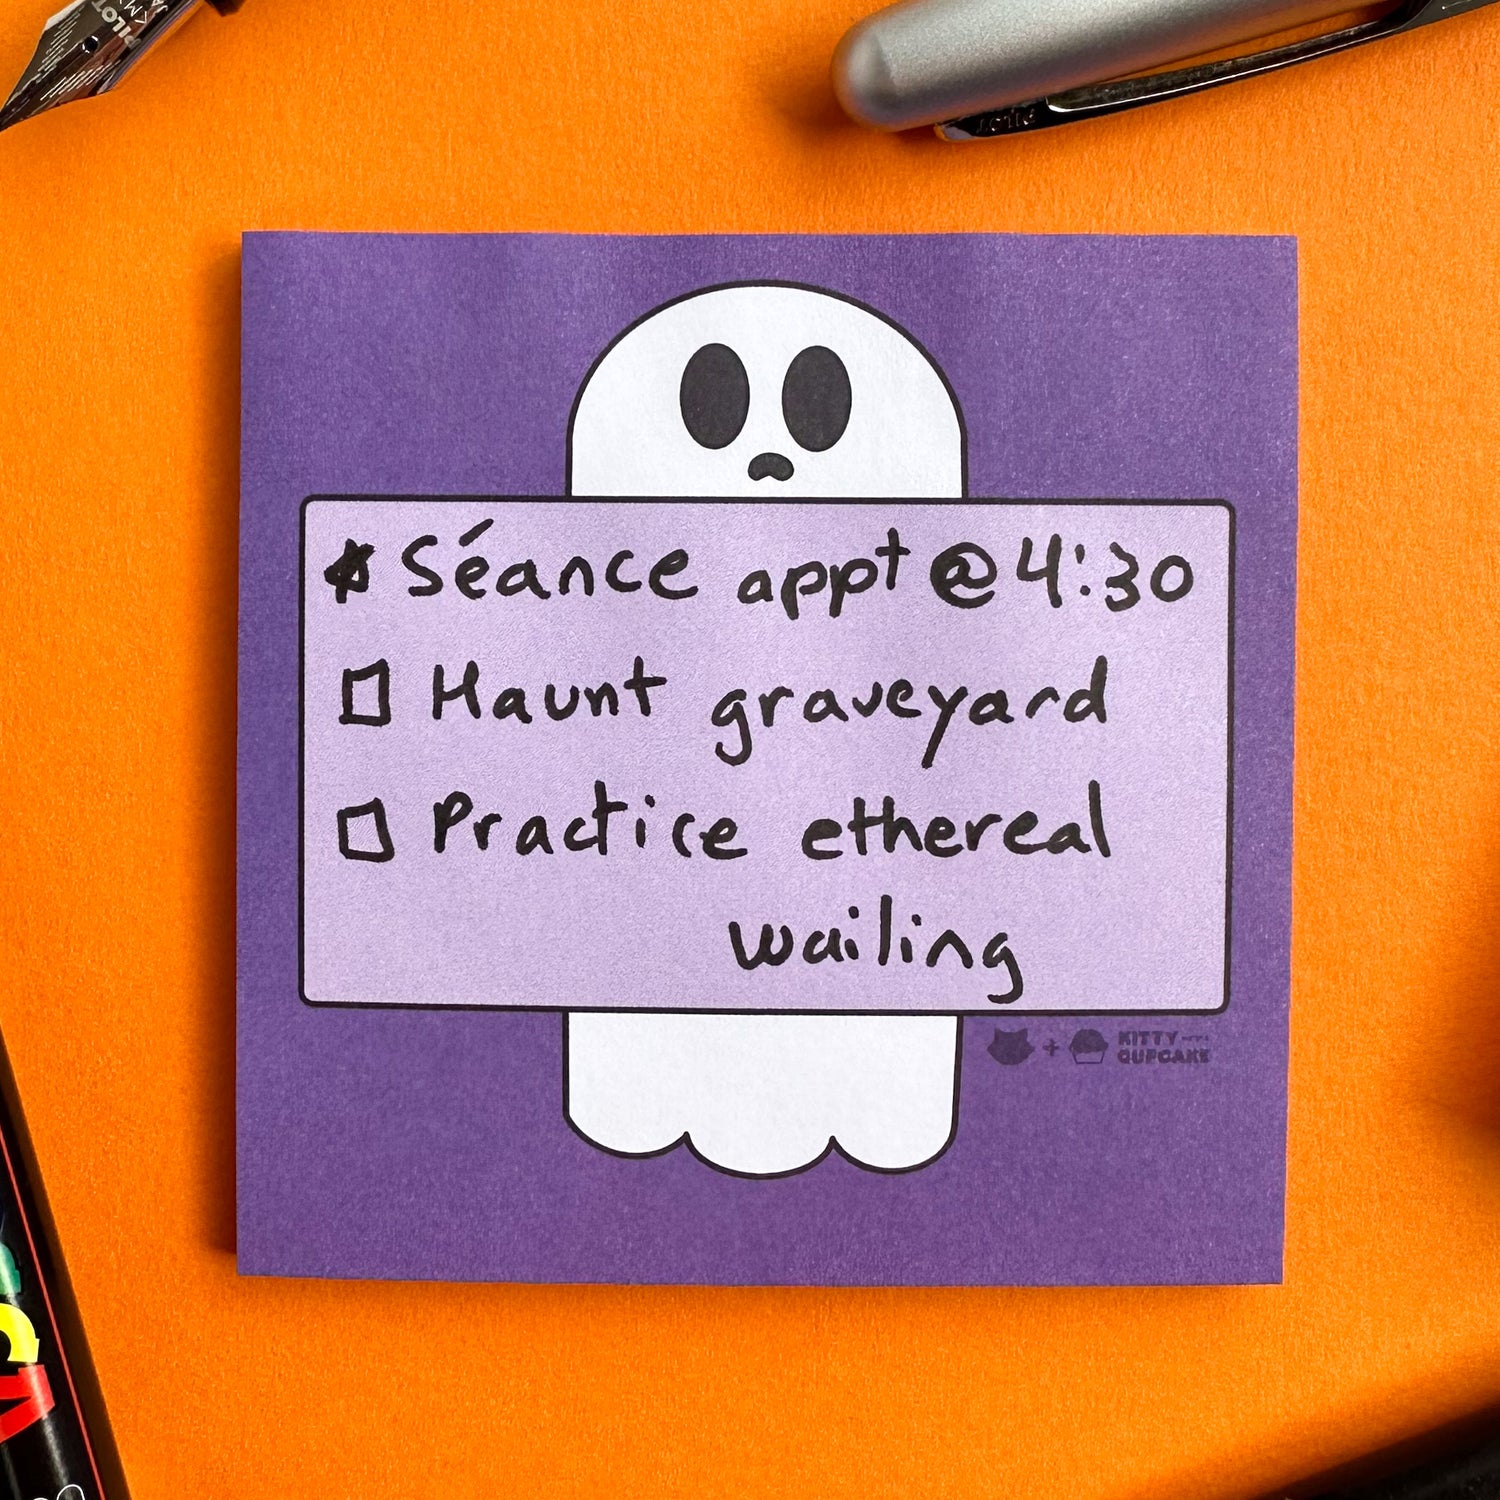 A purple square sticky notepad featuring an illustration of a ghost holding a box with a to-do list written on it. The to-do list reads "Seance appt @ 4:30, Haunt Graveyard,  Practice ethereal wailing". The notepad is on an orange background surrounded by pens.